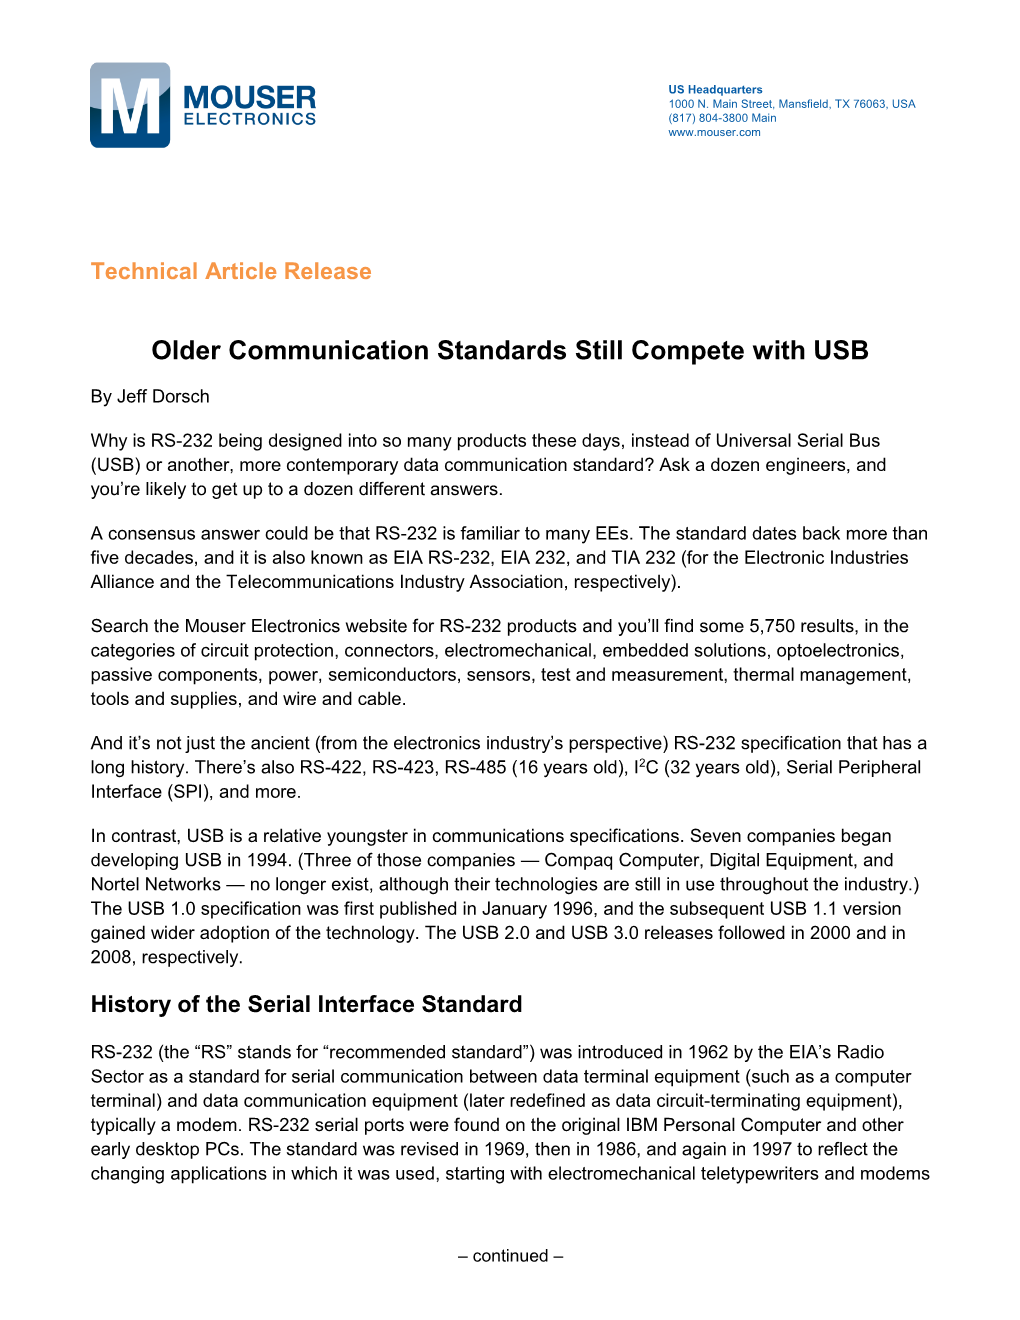 Tech Article: Older Communication Standards Still Compete With